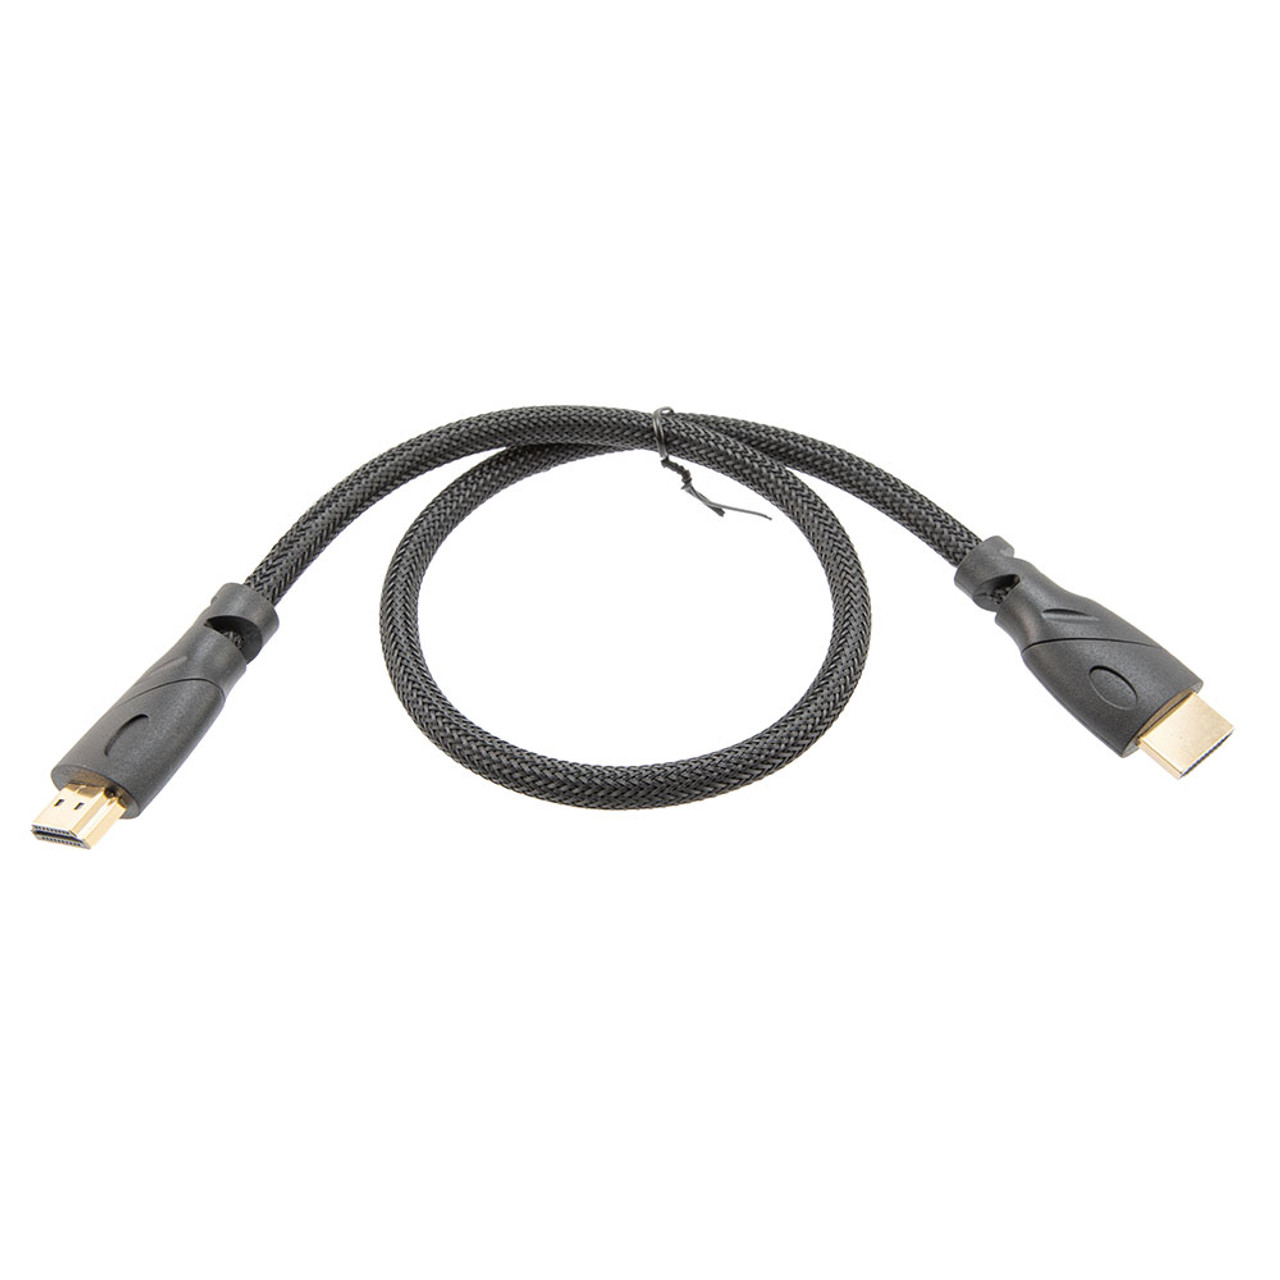 NavePoint HDMI 2.0 Male to Male Braided Cable, PVC with Nylon, Black, PVC shell, Supports 4K @ 60Hz, 0.5M